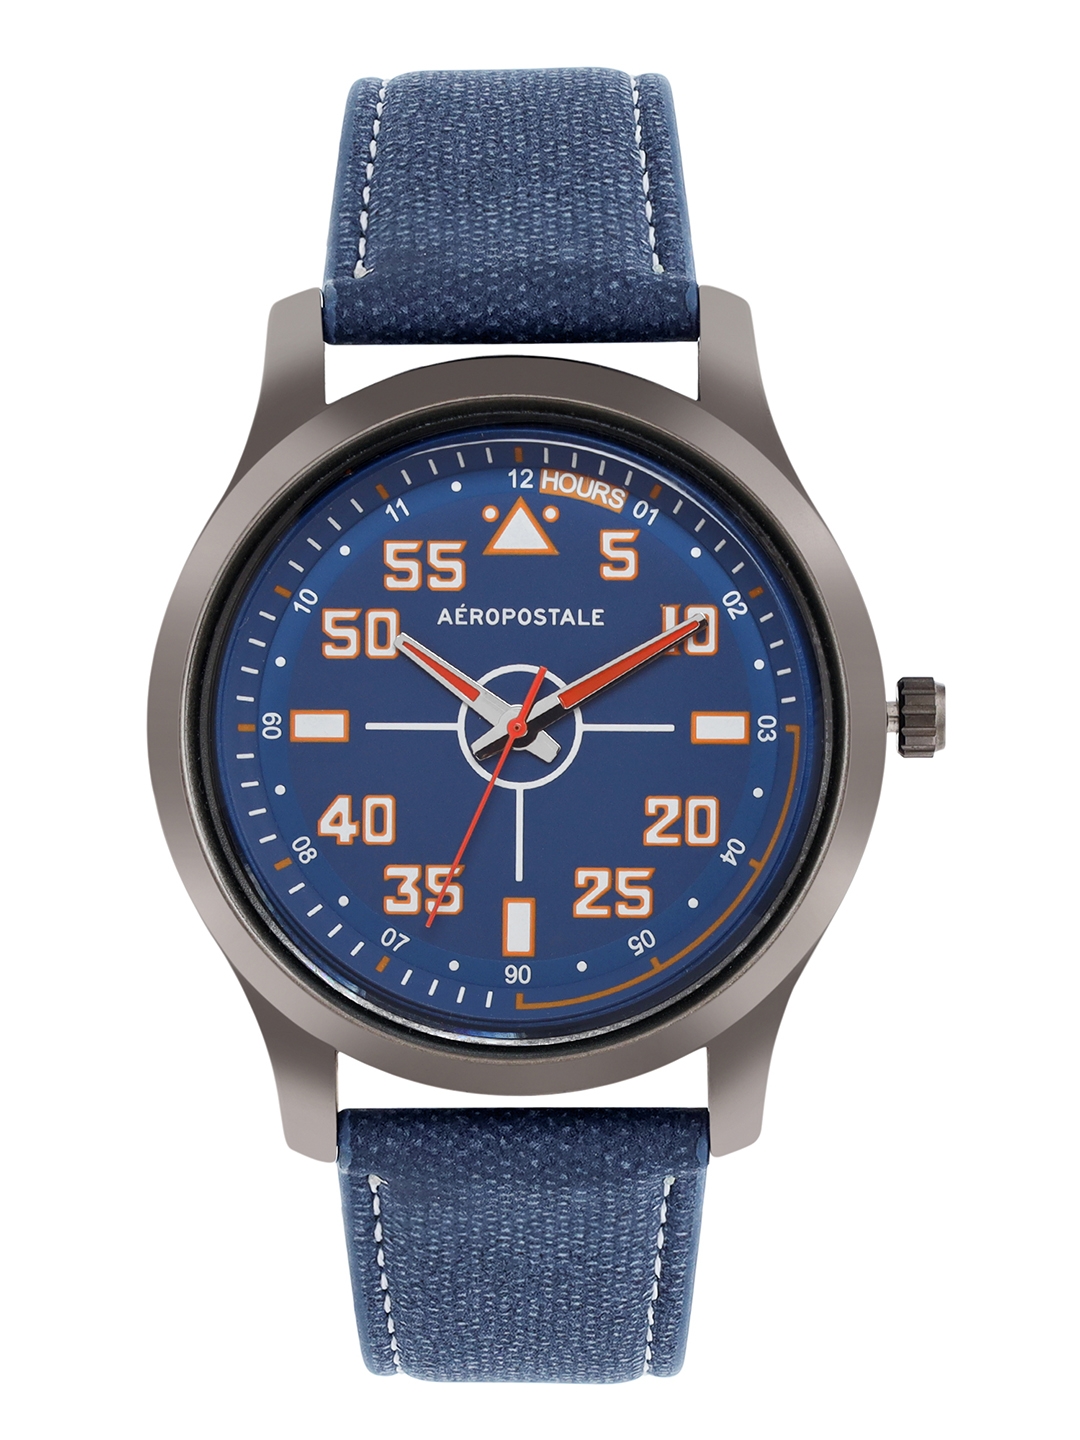 Aeropostale | Aeropostale "AERO_AW_A34_BLU" Classic Men’s Analog Quartz Wrist Watch, Metal Alloy Blue case, Blue Dial with contrasting white hand, Contrasting Faux PU Leather Navy Blue wrist Band  Water resistant